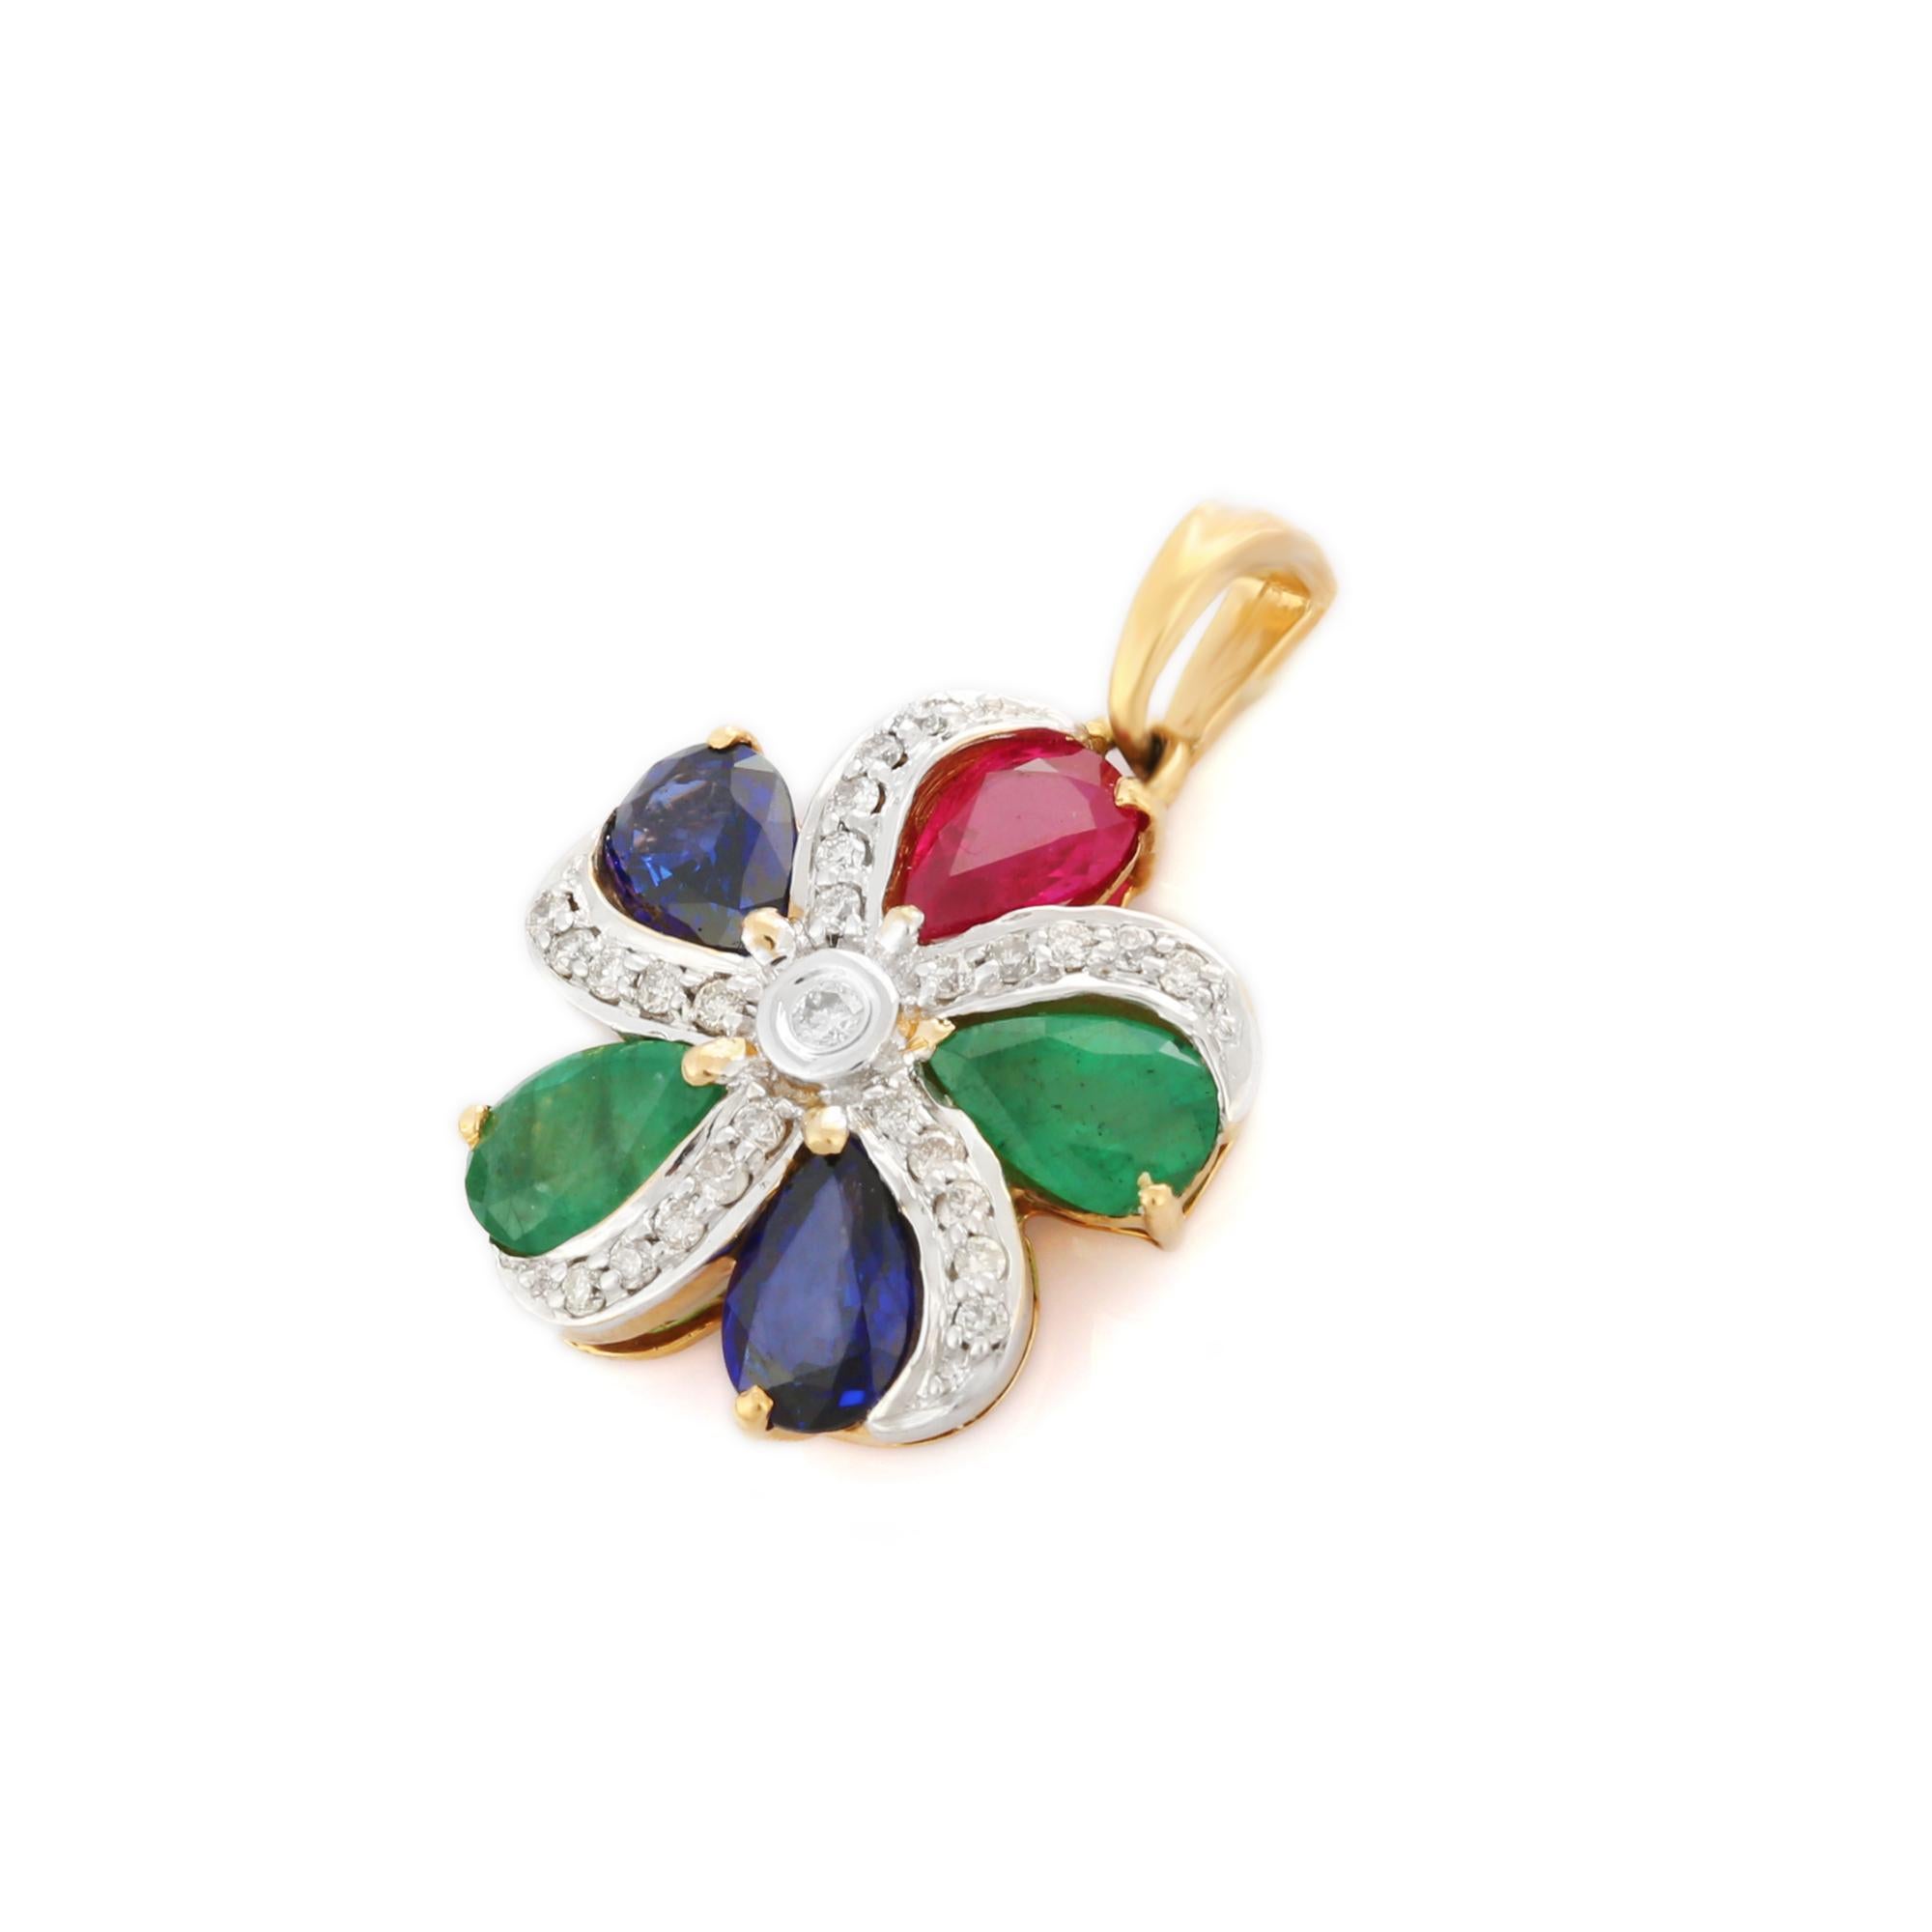 Bespoke emerald, ruby, sapphire and diamond flower pendant in 18k Gold. It has a pear cut gemstone studded with diamonds that completes your look with a decent touch. Pendants are used to wear or gifted to represent love and promises. It's an